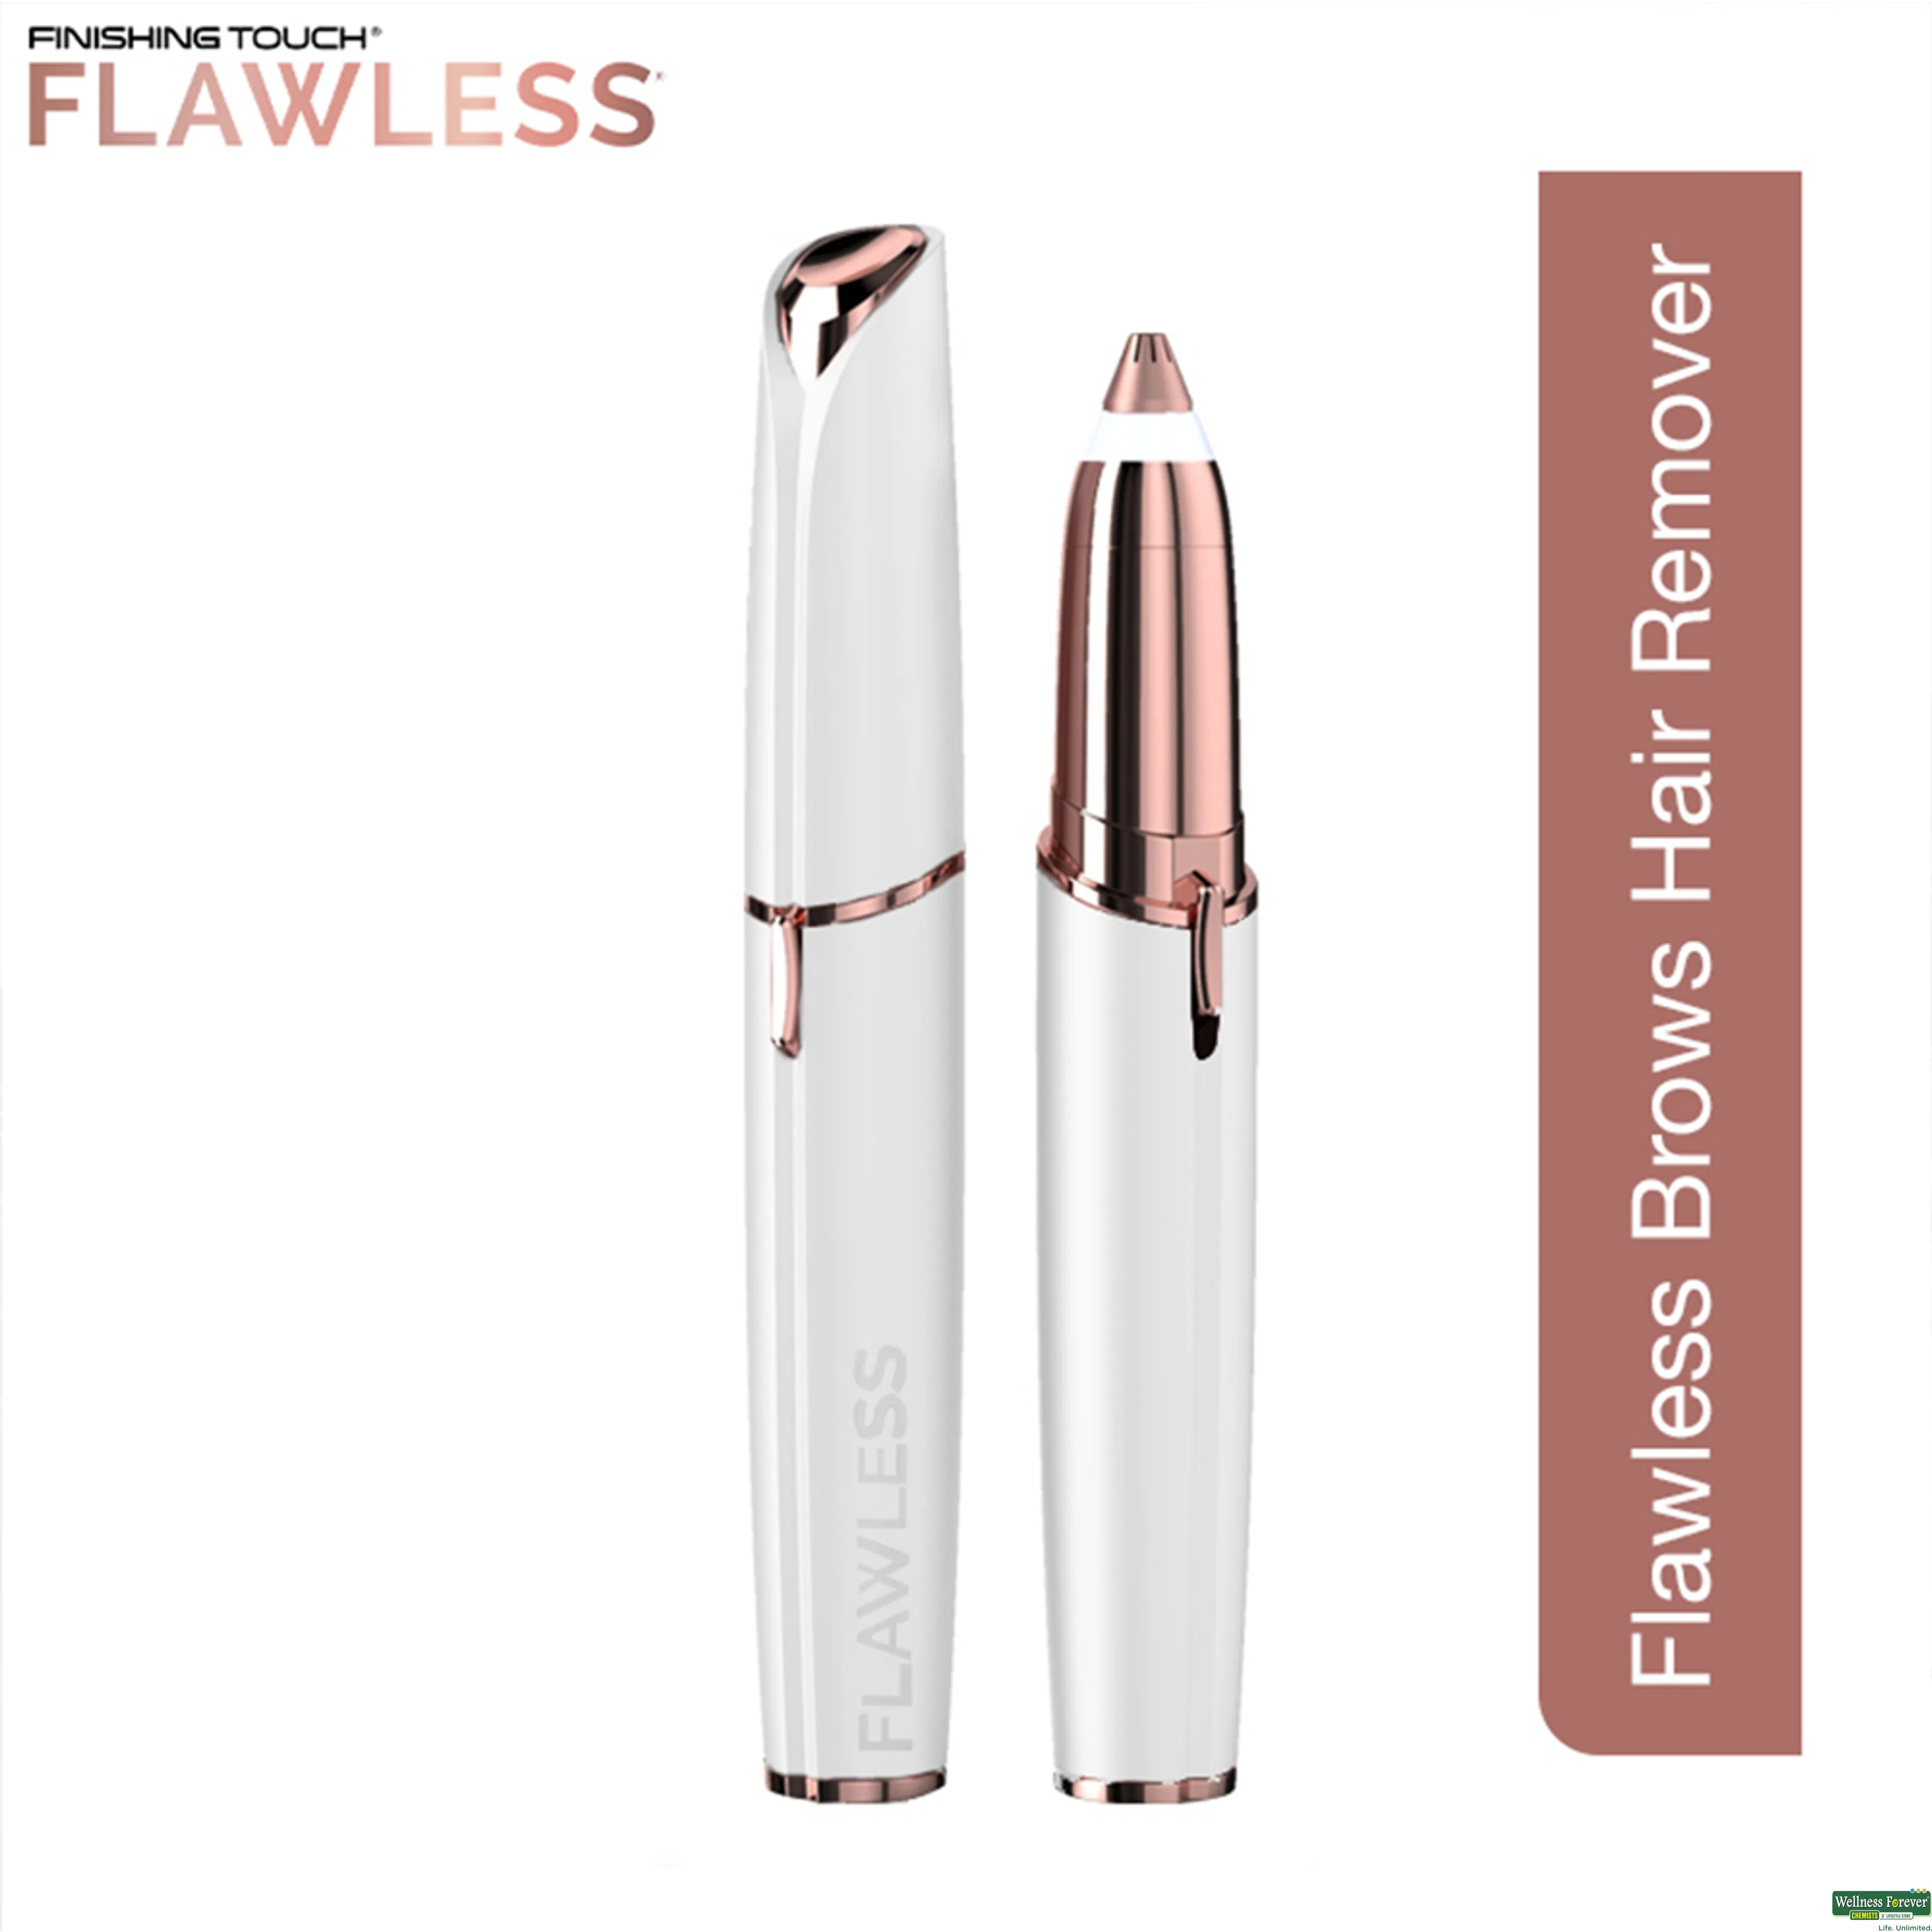 White Finishing Touch Flawless Leg Hair Remover, For personal or parlour at  Rs 425 in Delhi